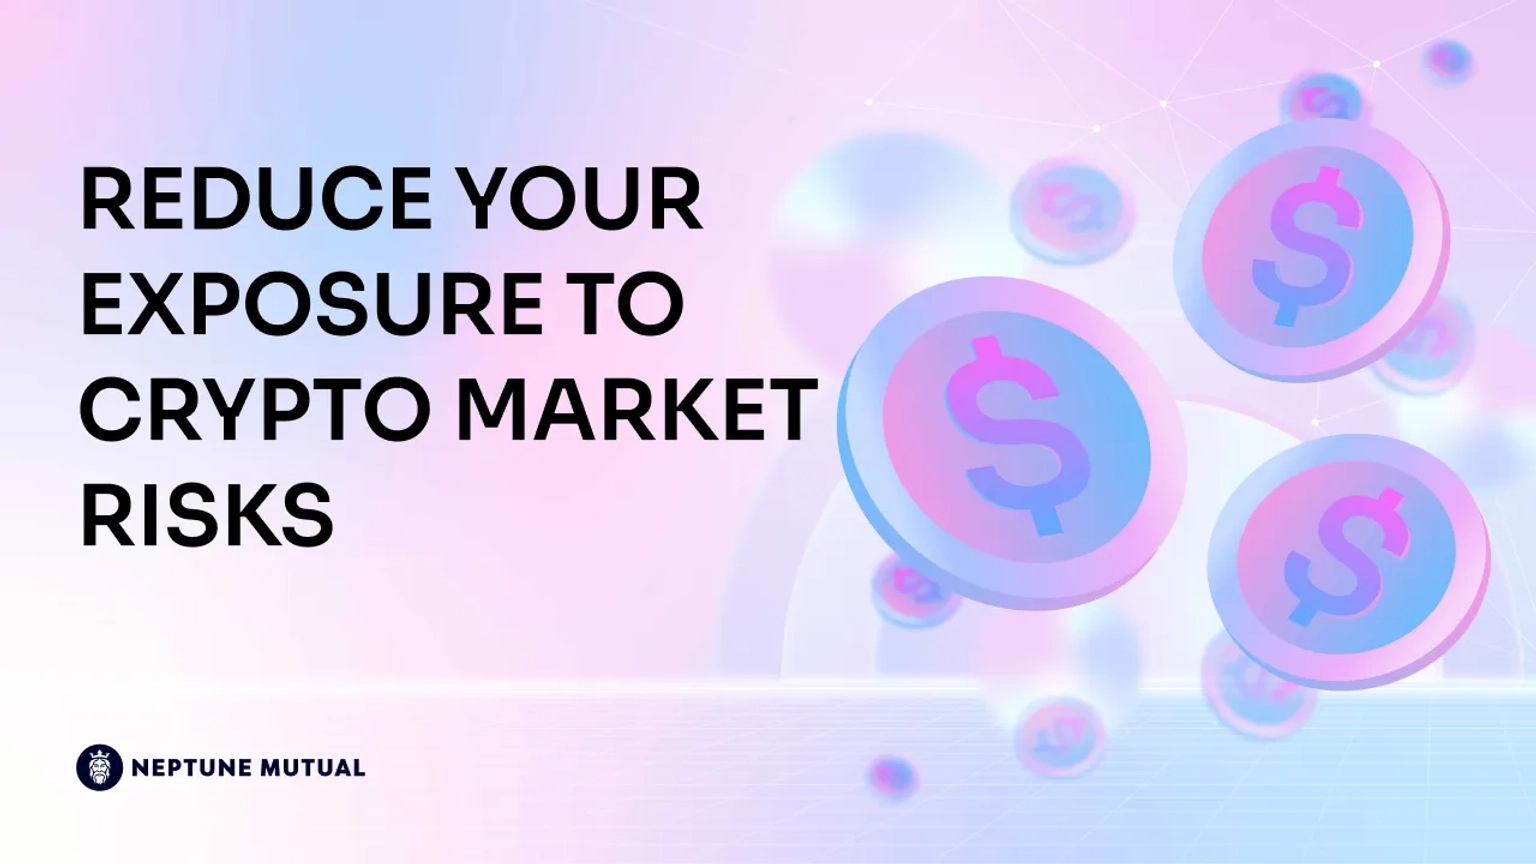 Reduce Your Exposure to Crypto Market Risks